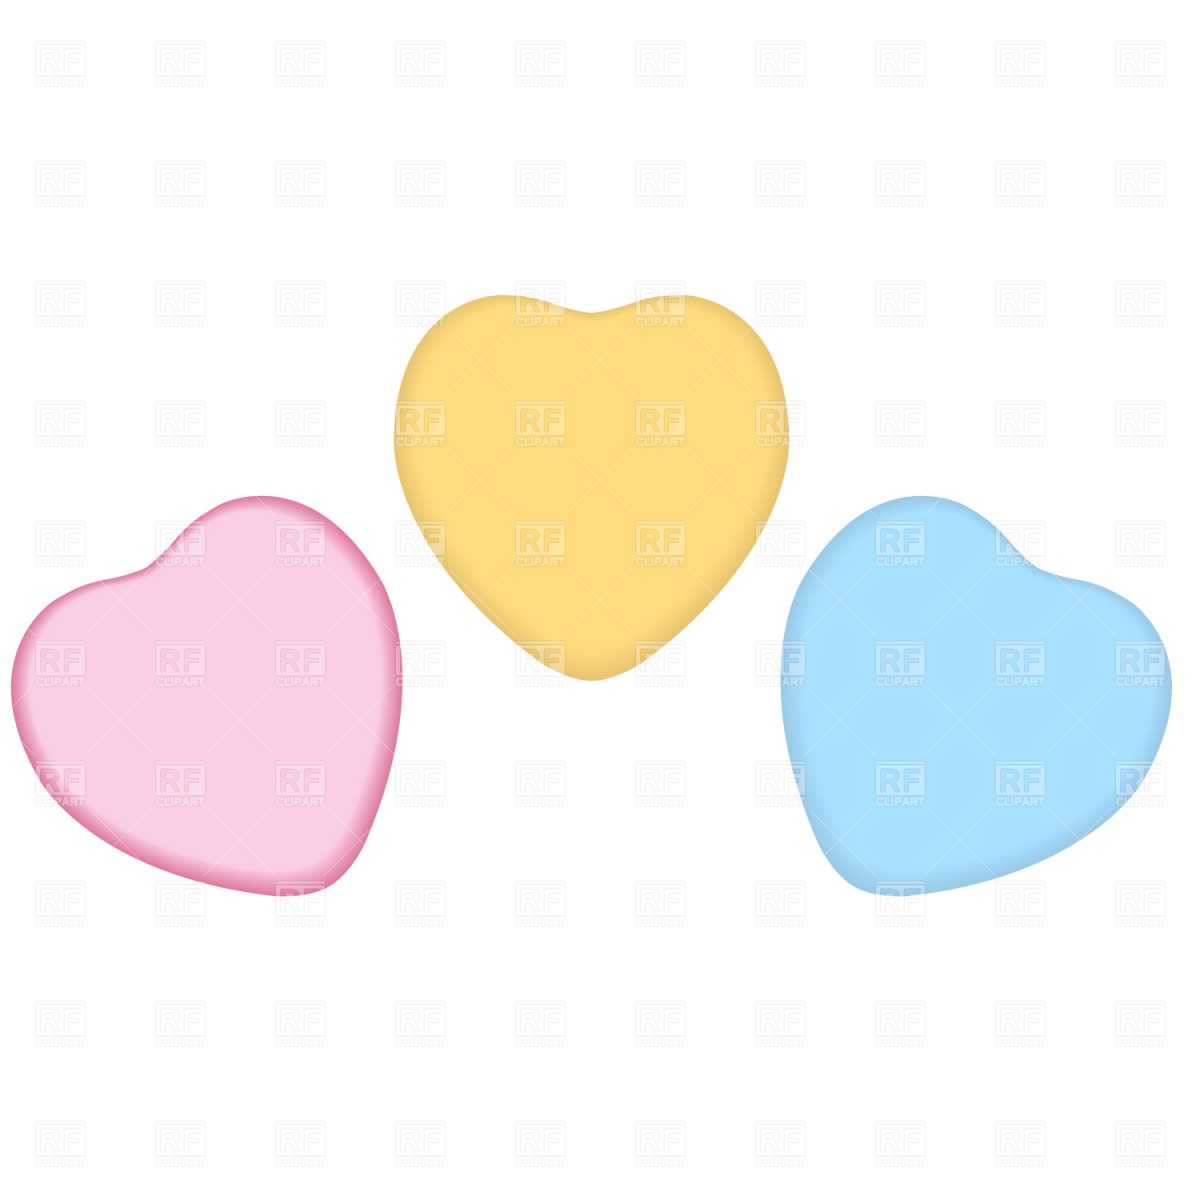 Clipart Catalog   Food And Beverages   Candy Heart Download Royalty